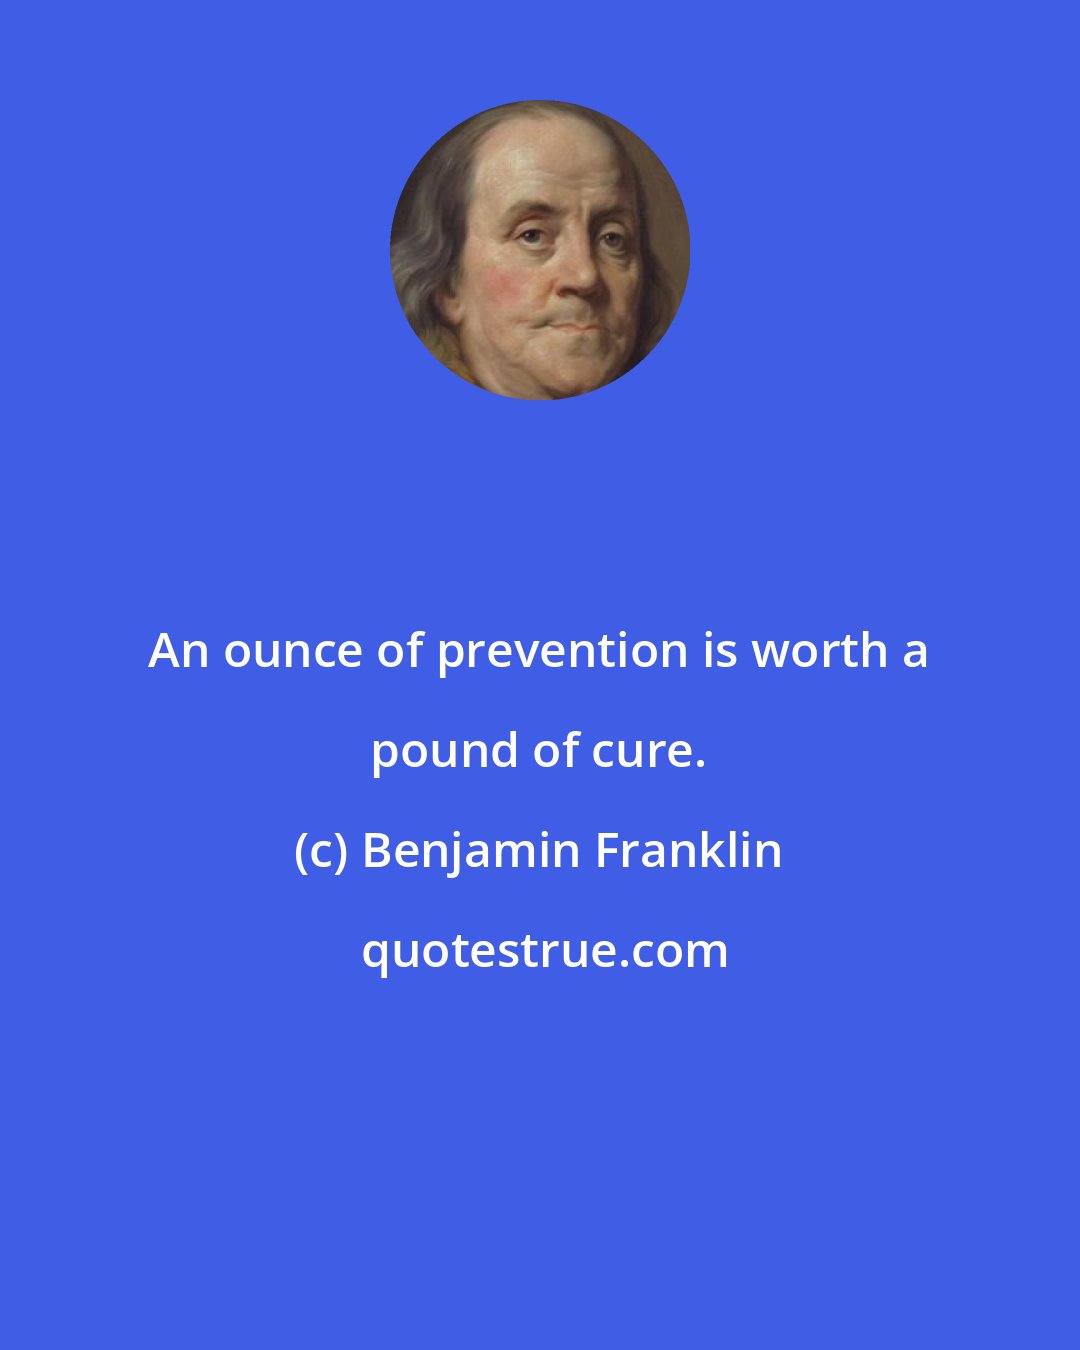 Benjamin Franklin: An ounce of prevention is worth a pound of cure.